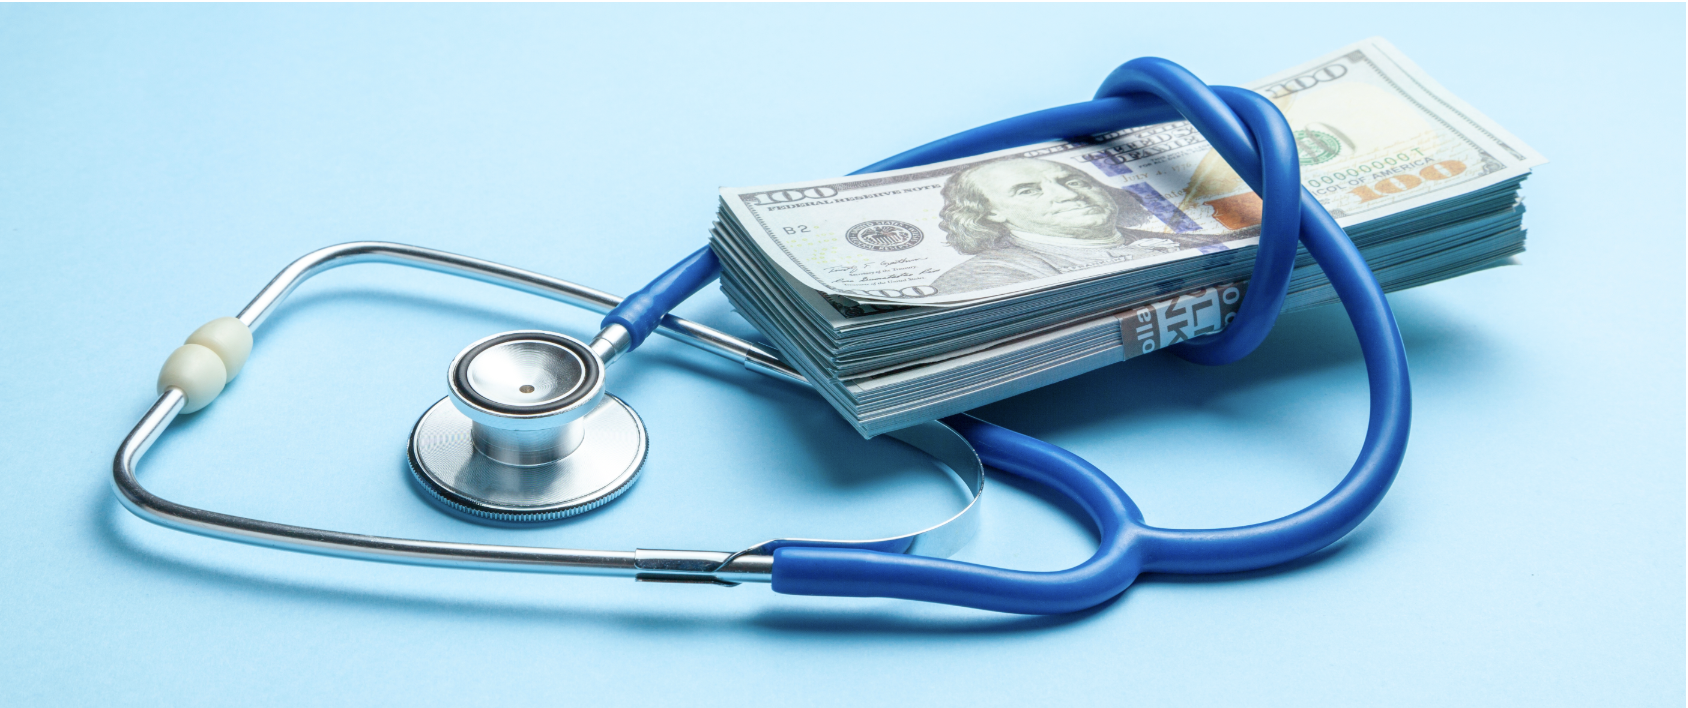 Top healthcare companies offer financial wellbeing benefits